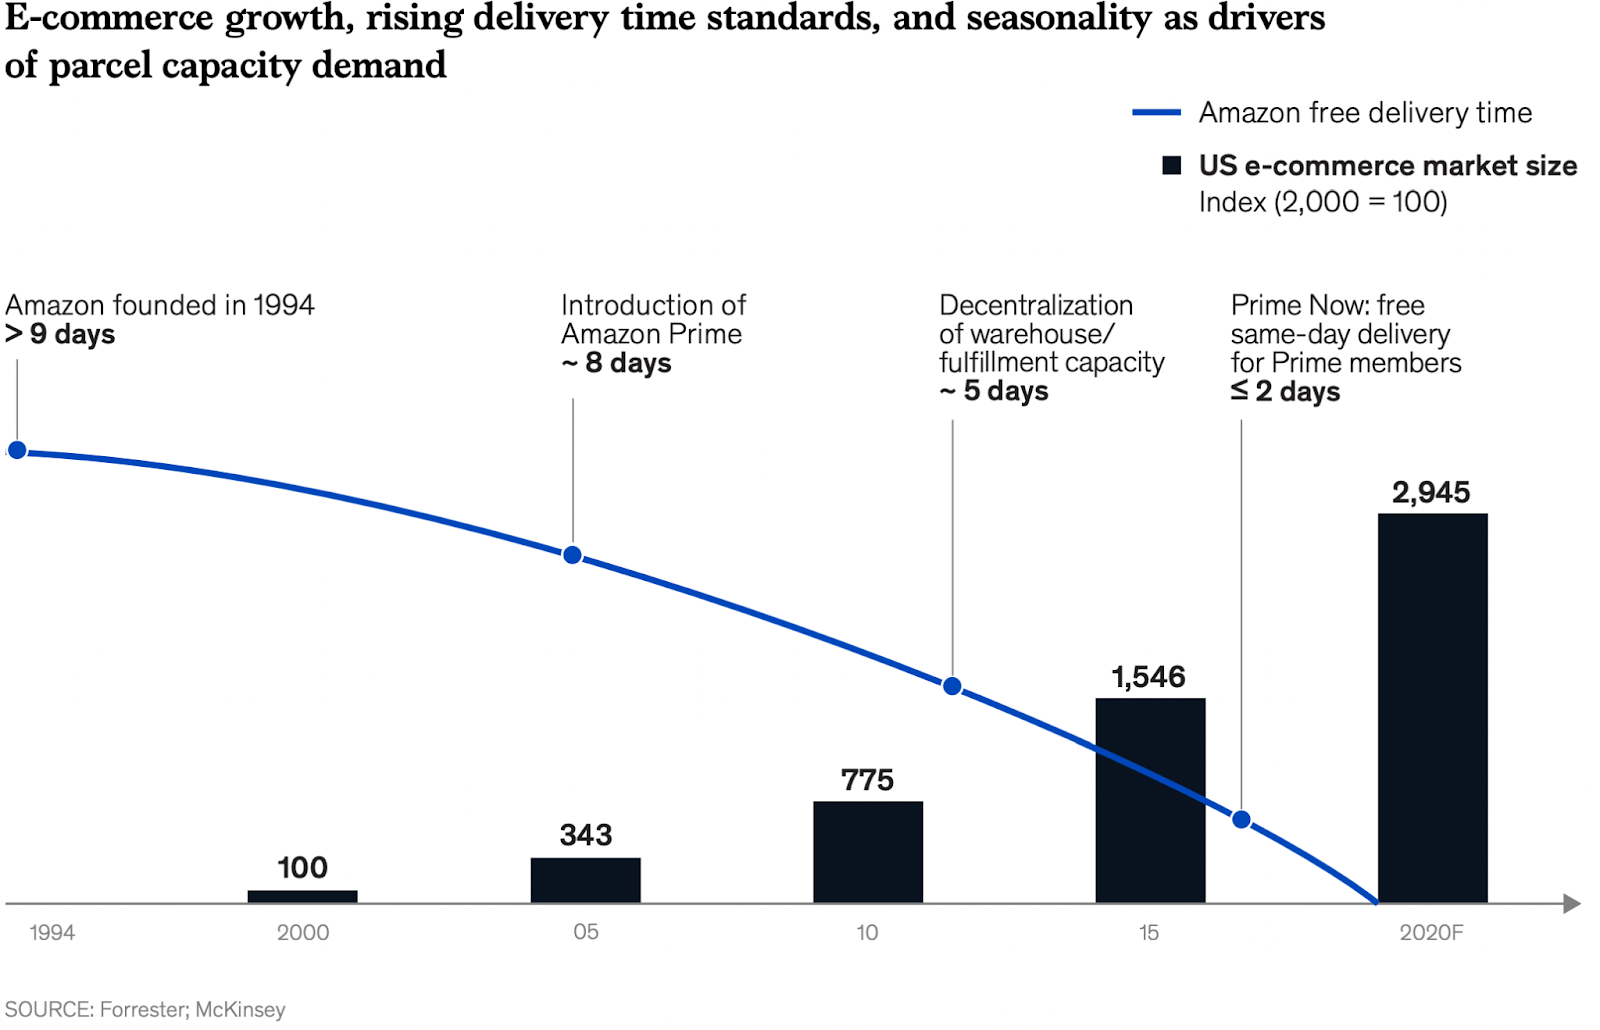 How delivery times are reducing year on year